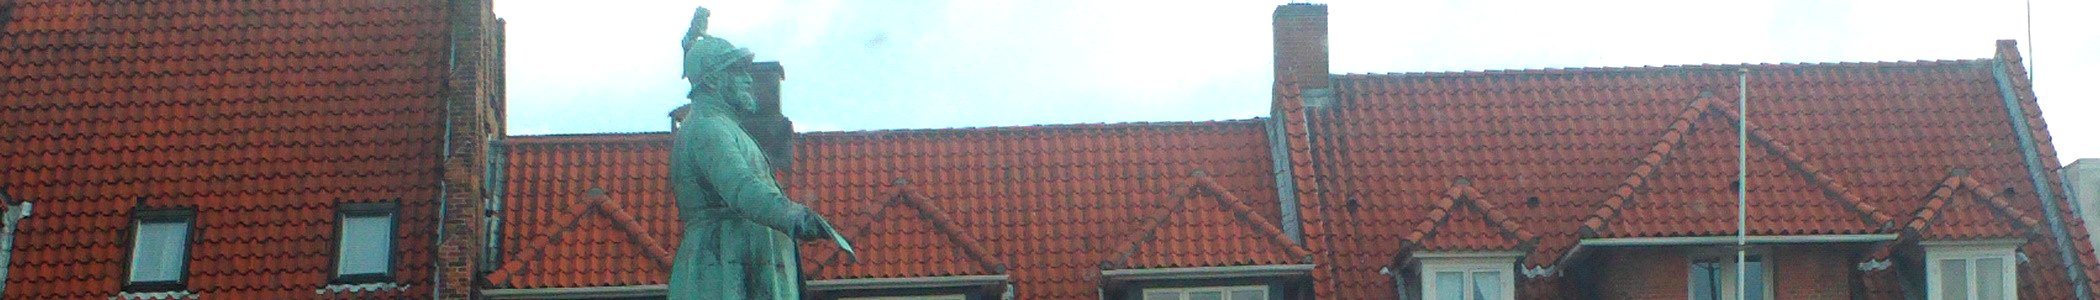 Koge banner Tiled roofs and statue photo